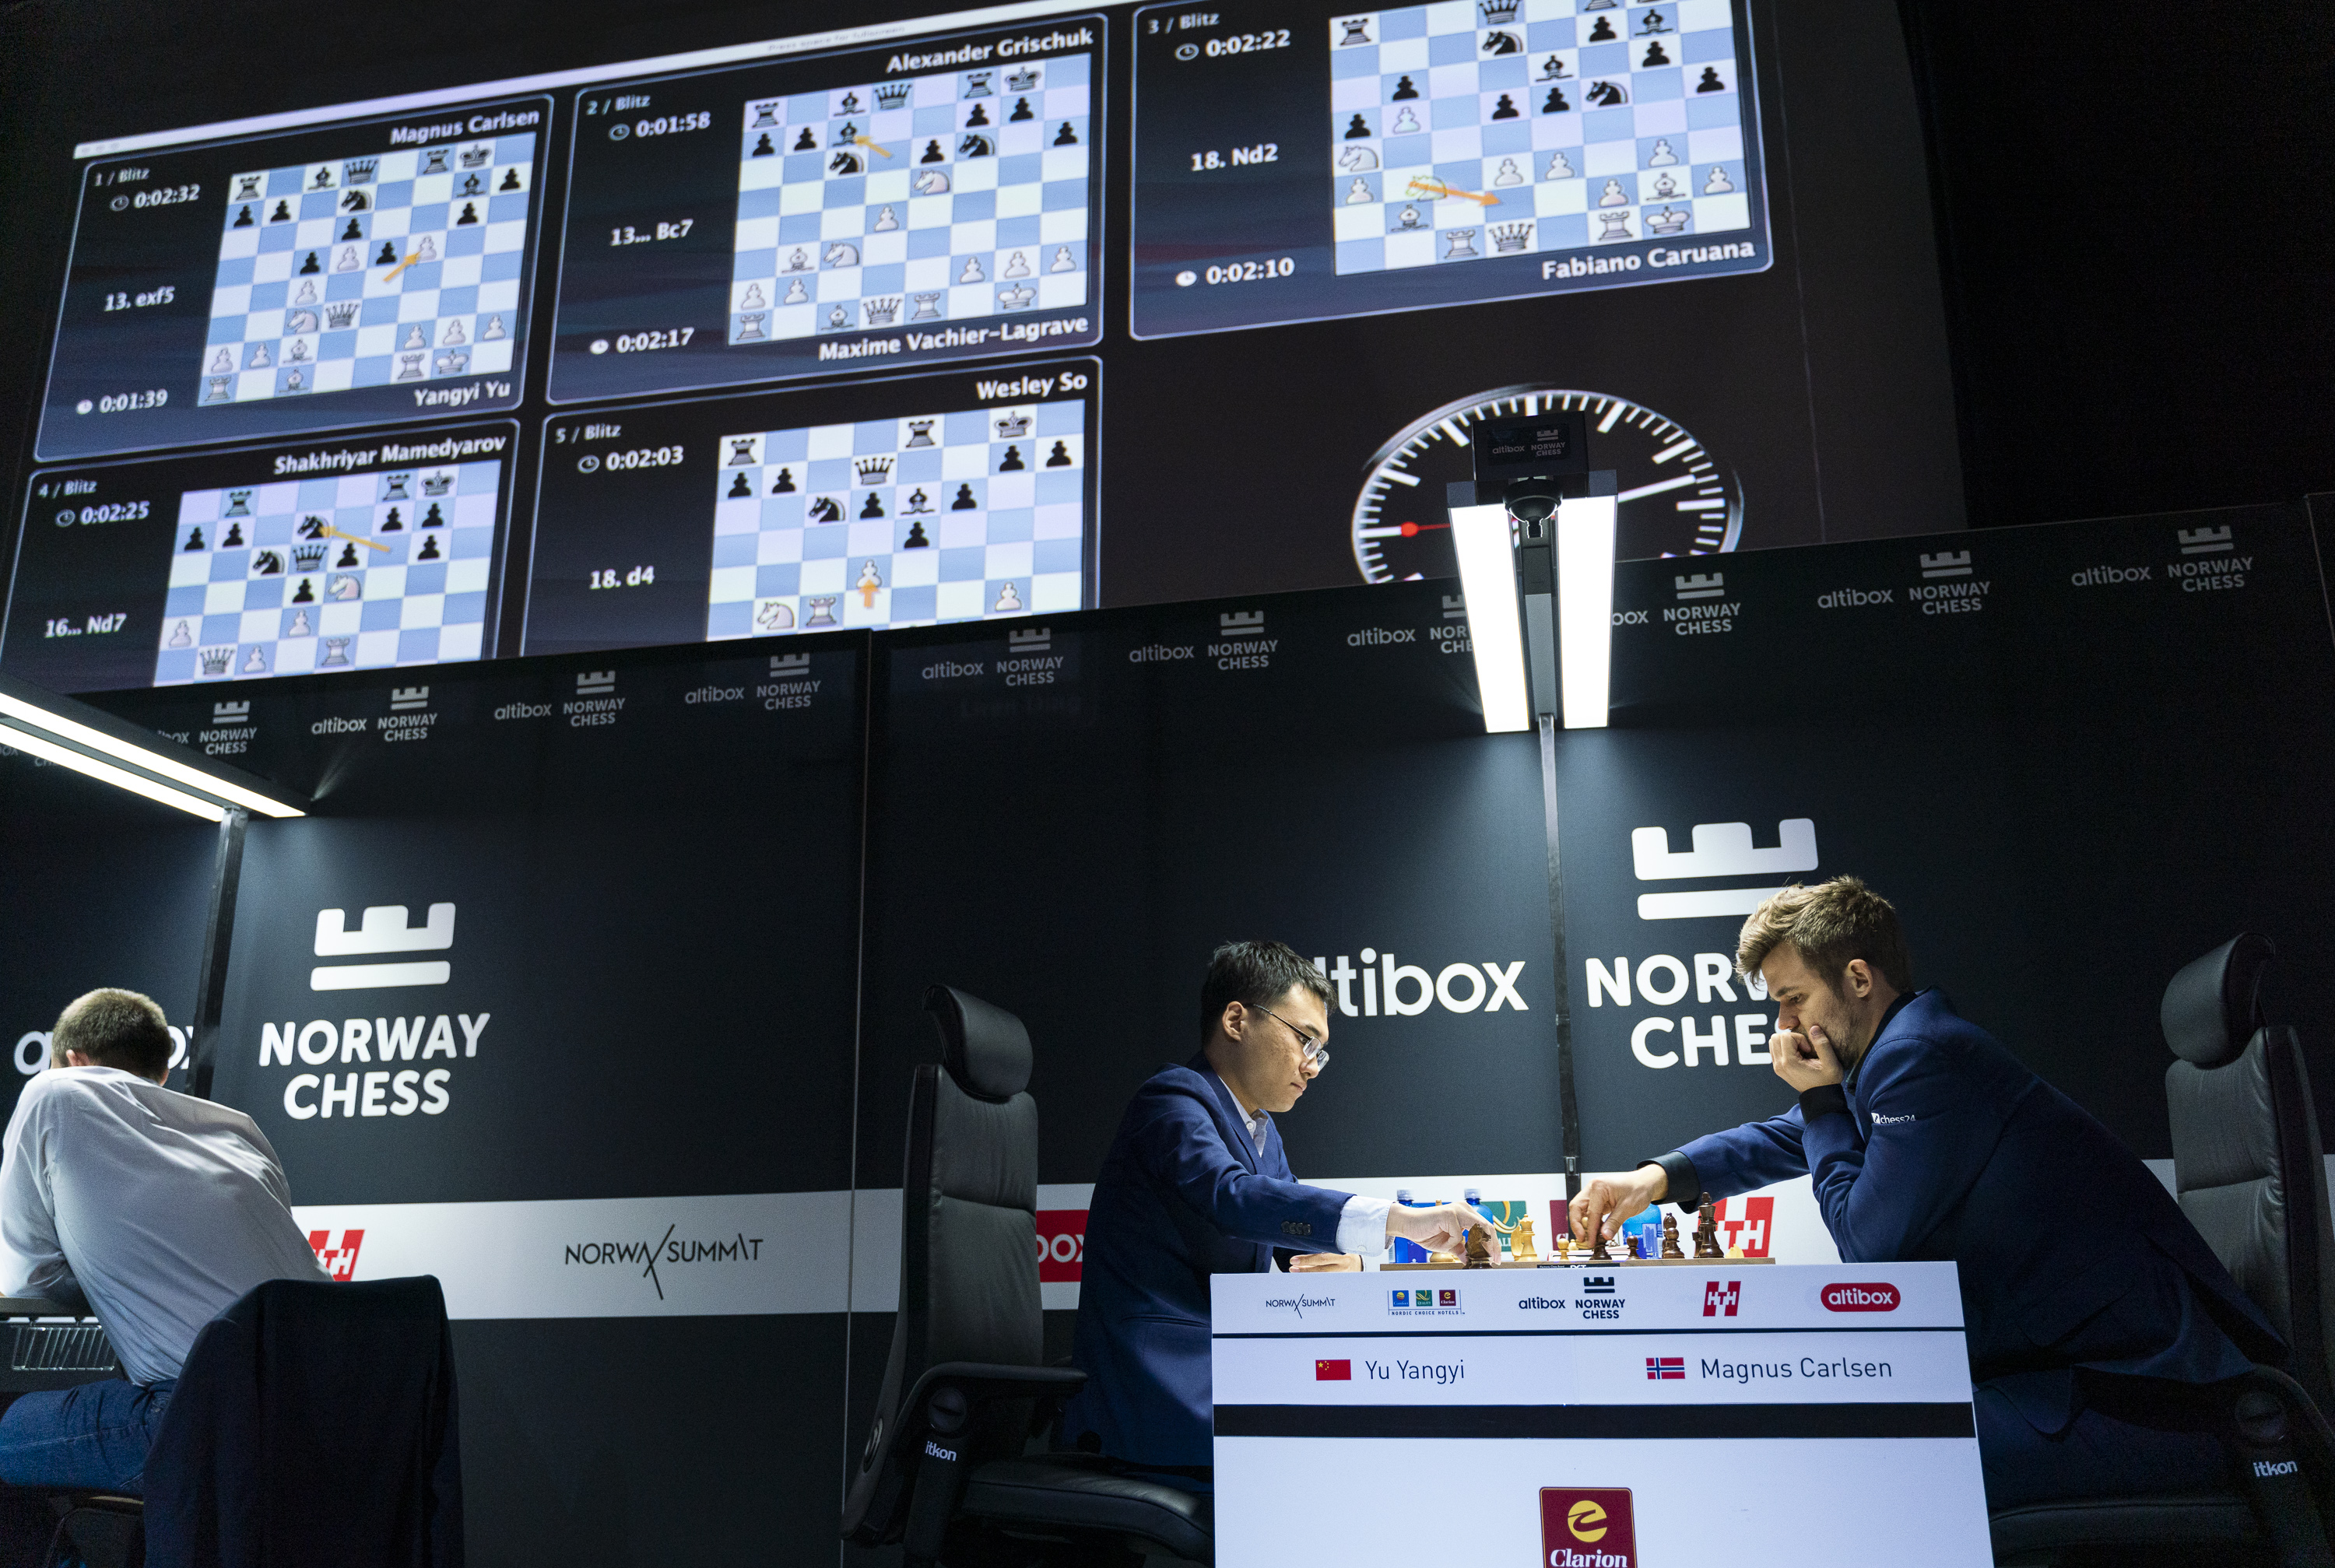 Norway Chess Pressconference and blitz